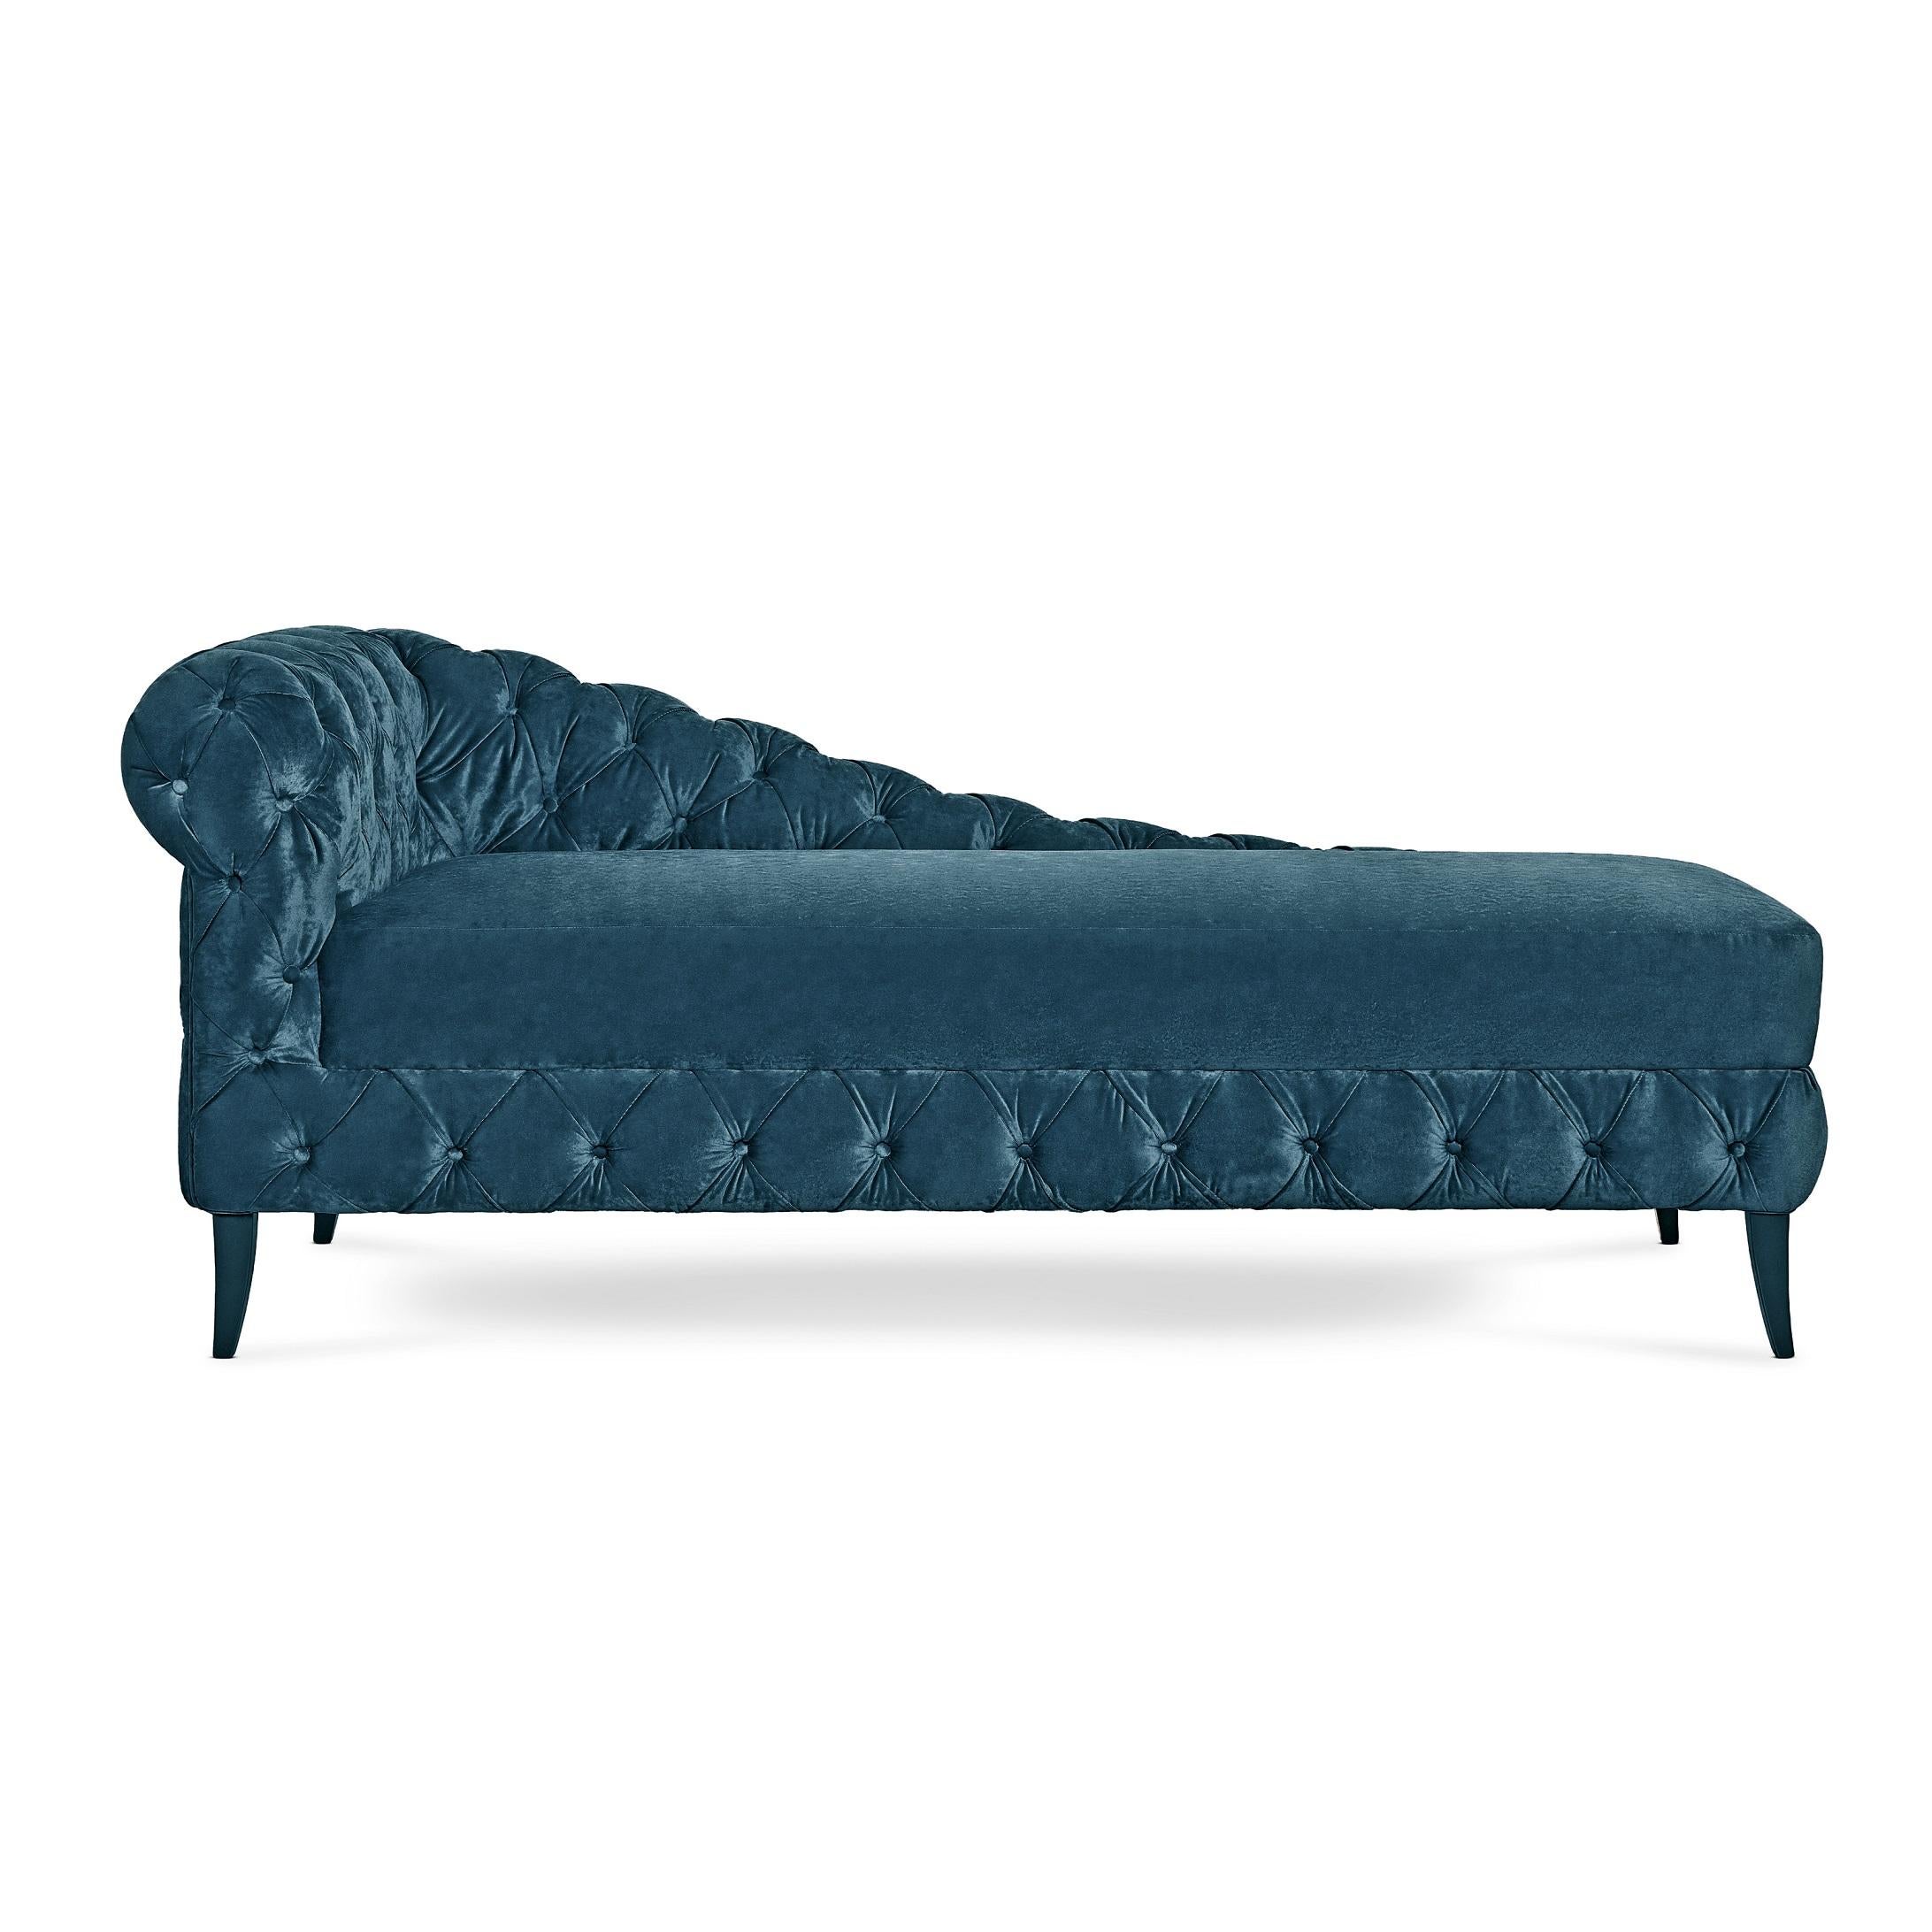 Portuguese Contemporary chaise lounge Offered in Button & Capitonnée Tufting For Sale